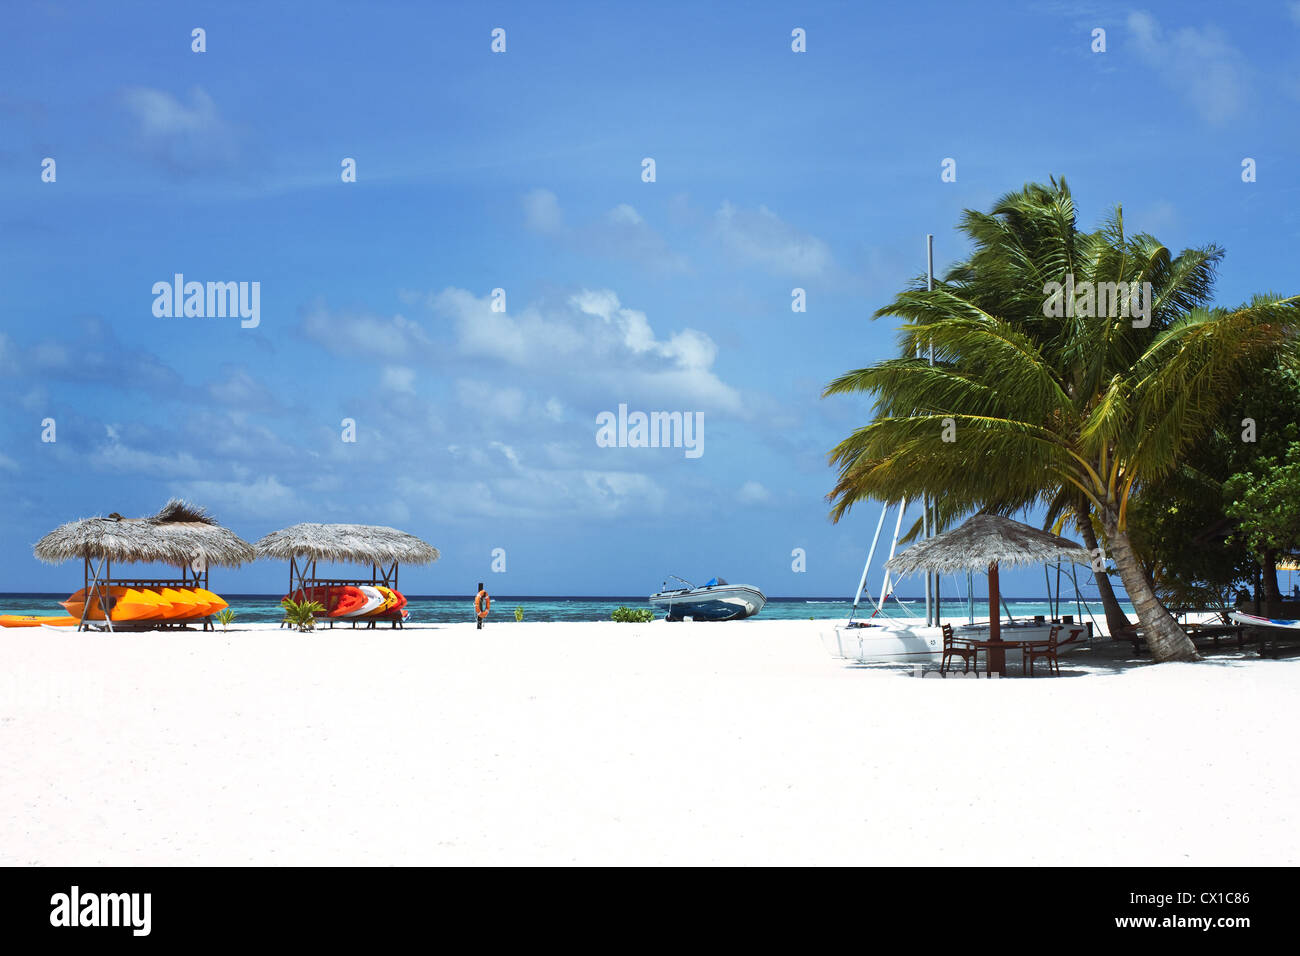 Landscape photo of Coconut trees and couches on white sand beach with blue sky Stock Photo